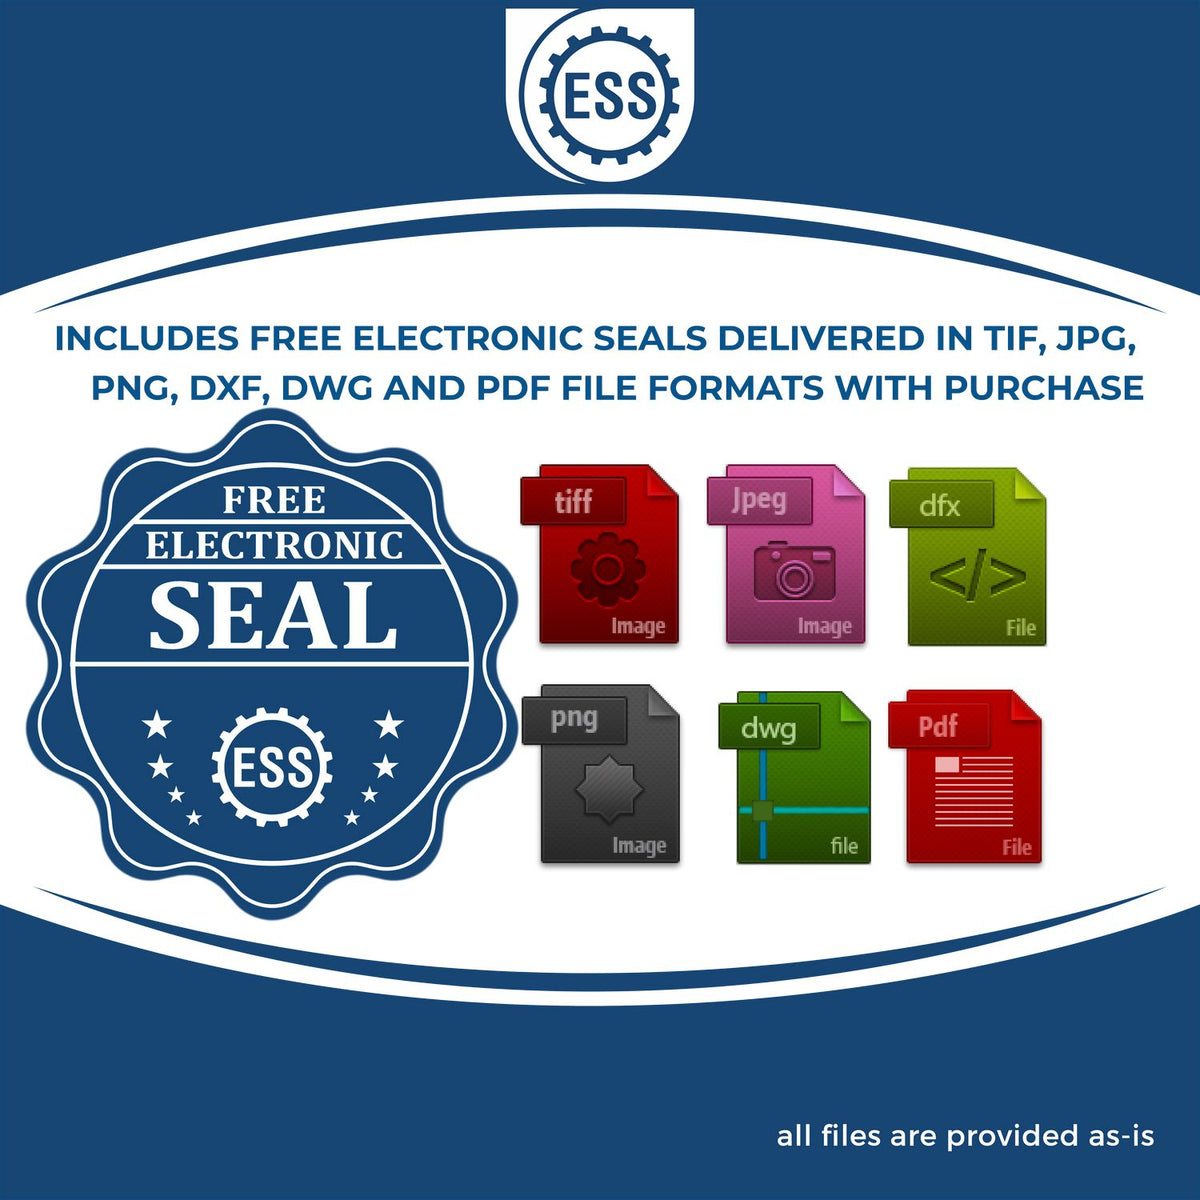 An infographic for the free electronic seal for the Long Reach Louisiana Geology Seal illustrating the different file type icons such as DXF, DWG, TIF, JPG and PNG.